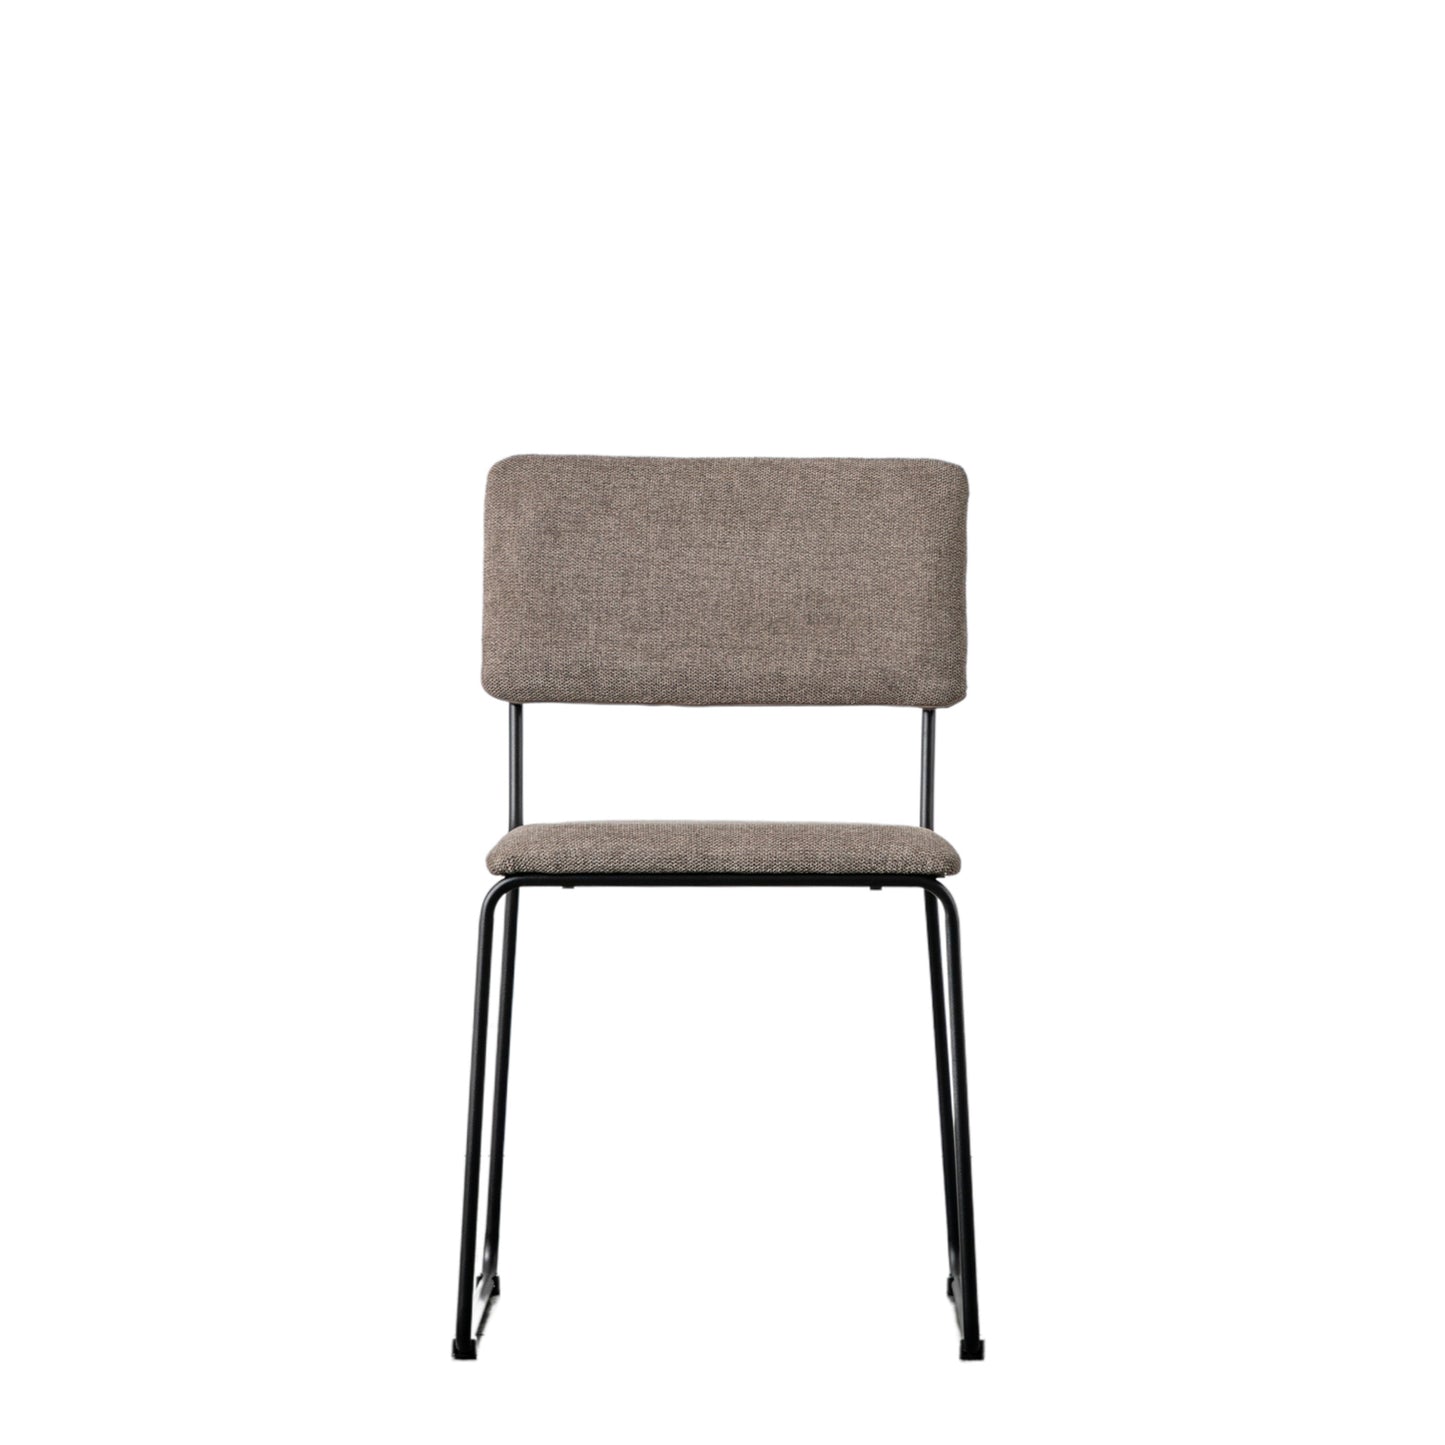 A Chivelstone Dining Chair Chocolate (2pk) with a beige upholstered seat and black legs for interior decor.